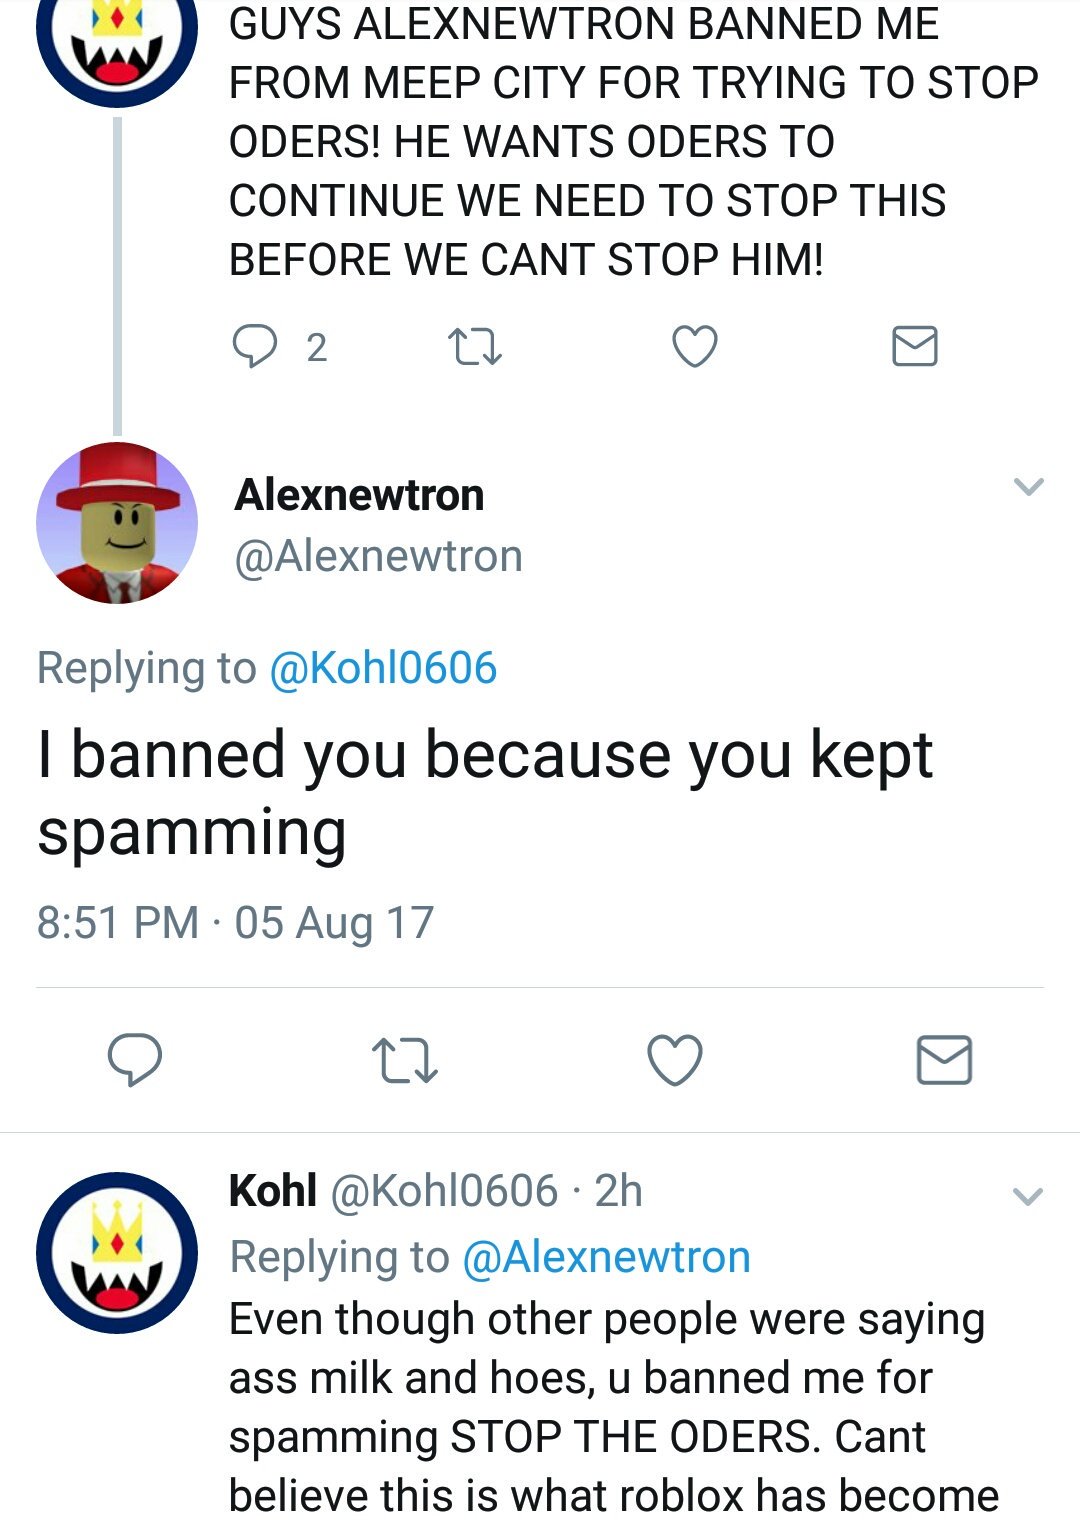 Lord Cowcow On Twitter Wow Alexnewtron Is Banning A Guy For Spamming Stop The Oders But Not The Oders Themselves - lord cowcow on twitter welcome to meepcity at roblox